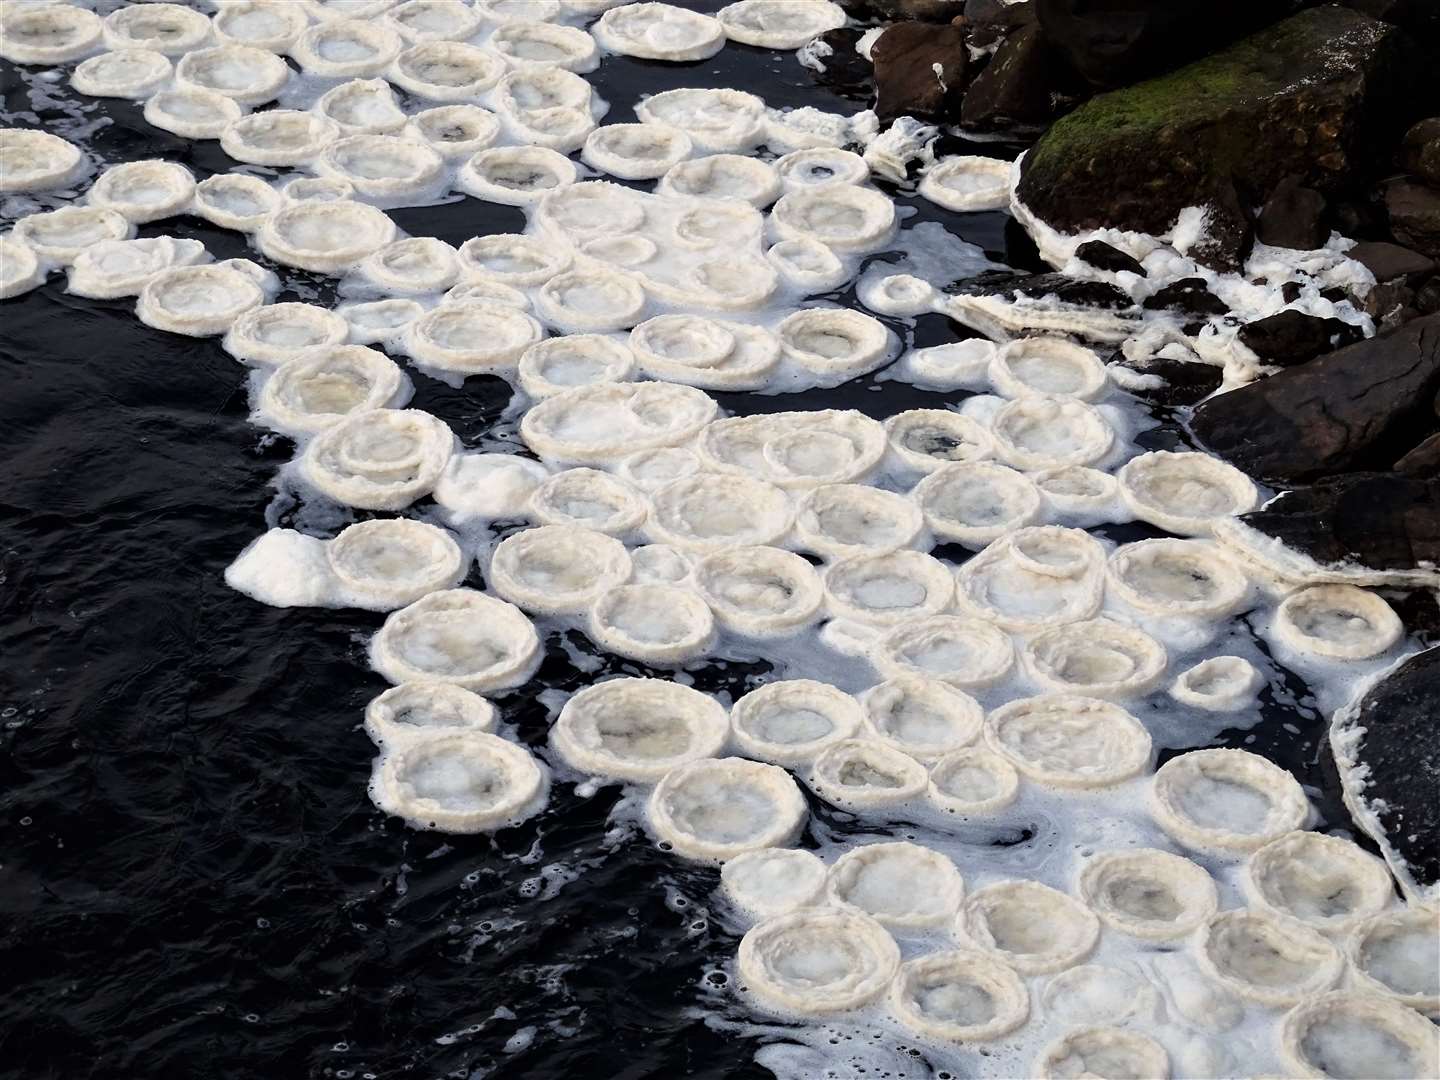 Ice pancakes are a relatively rare phenomenon that usually occur in very cold oceans and lakes. Pictures: Cath Whittles